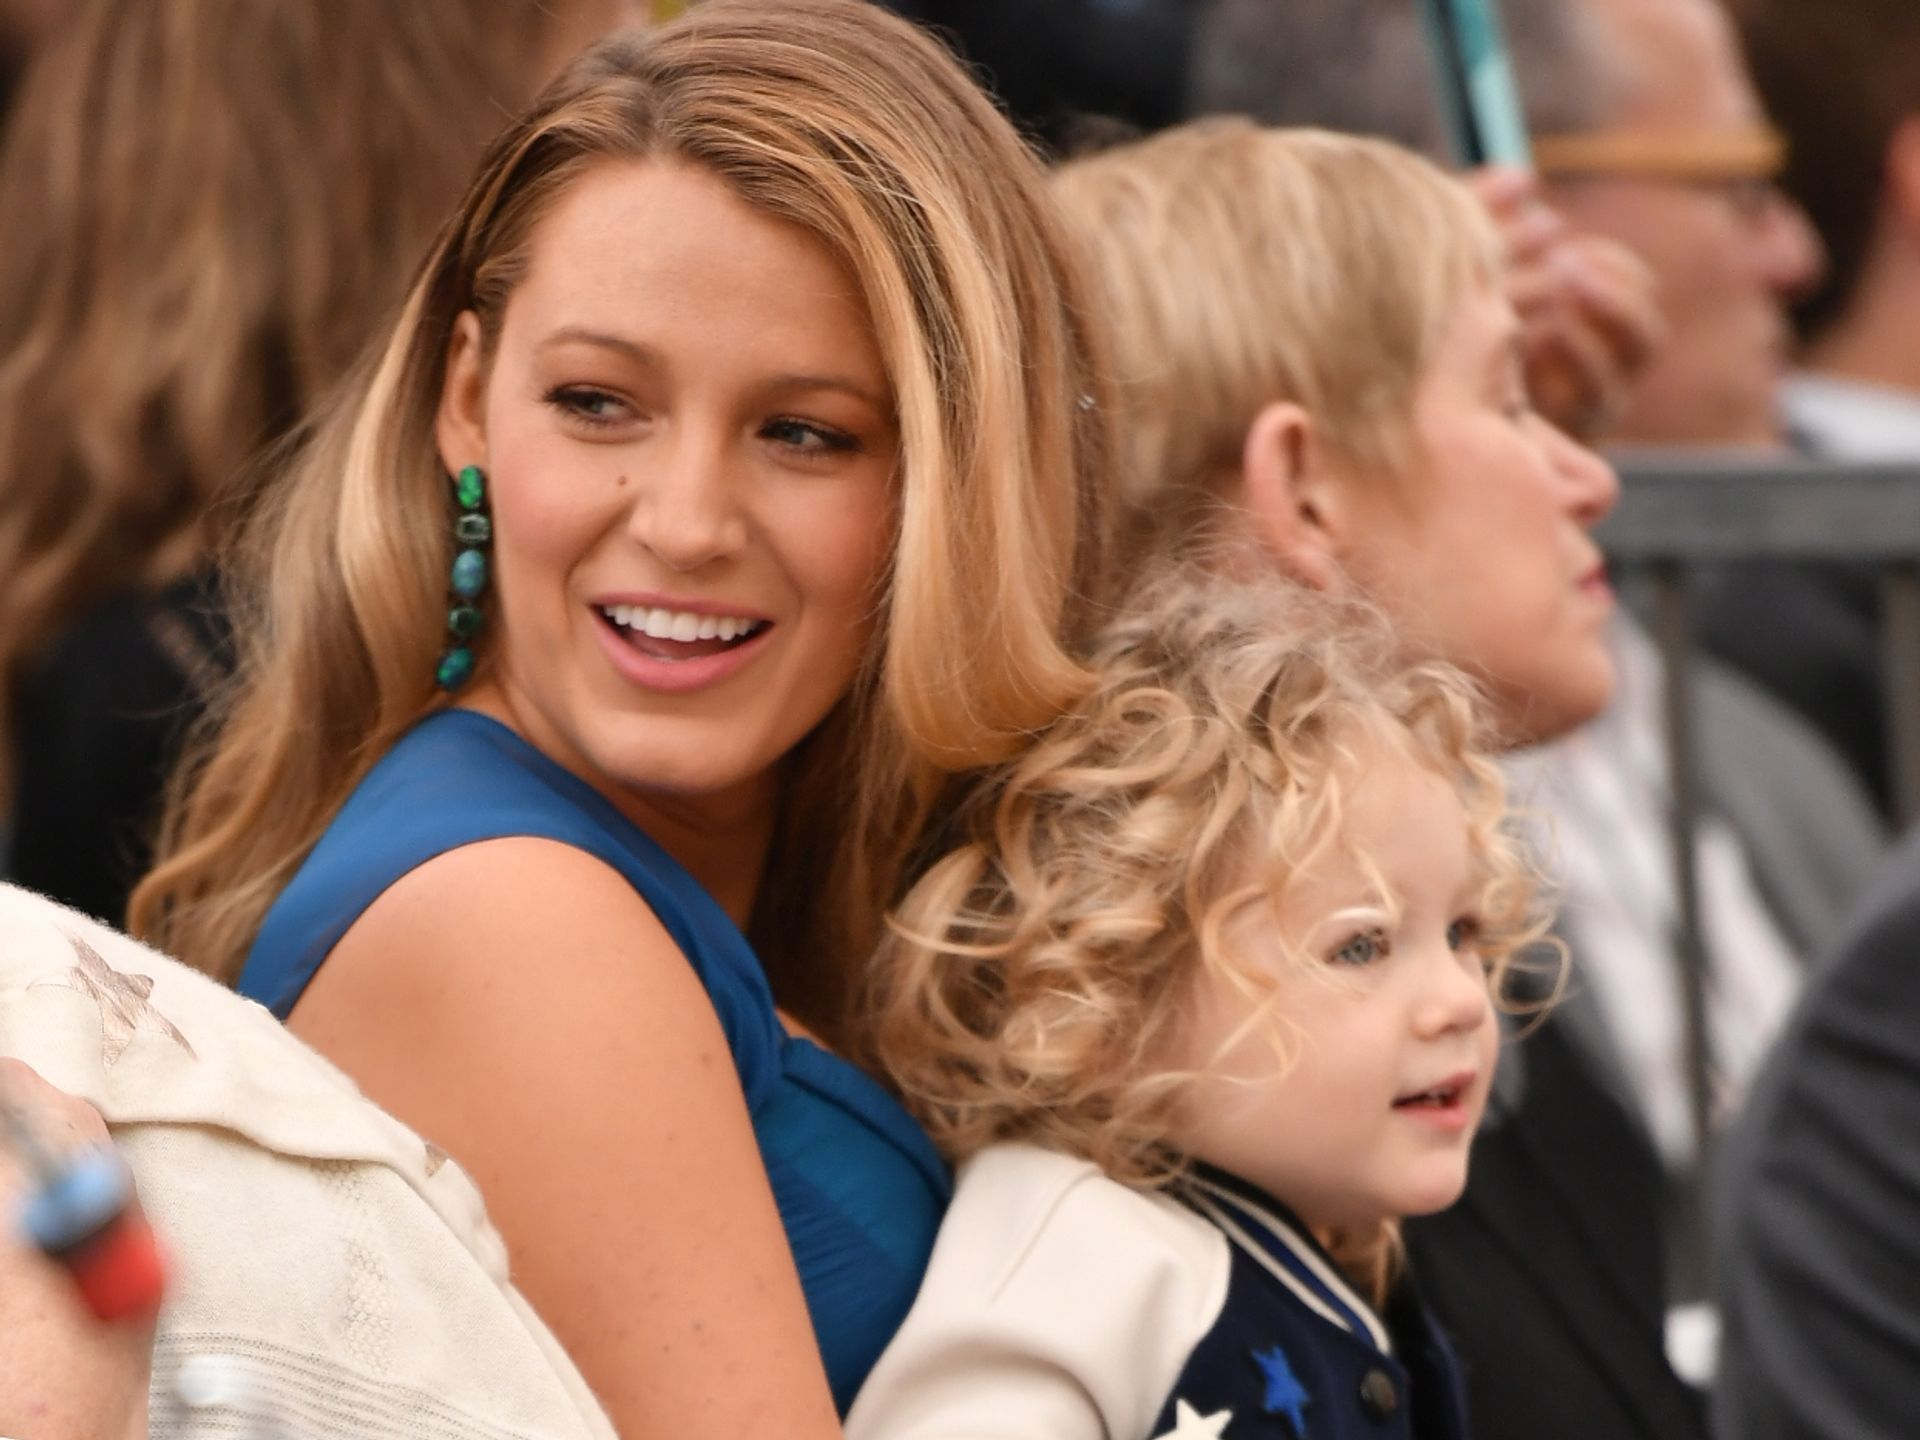 Blake Lively looks IDENTICAL to daughter James in unearthed childhood photo